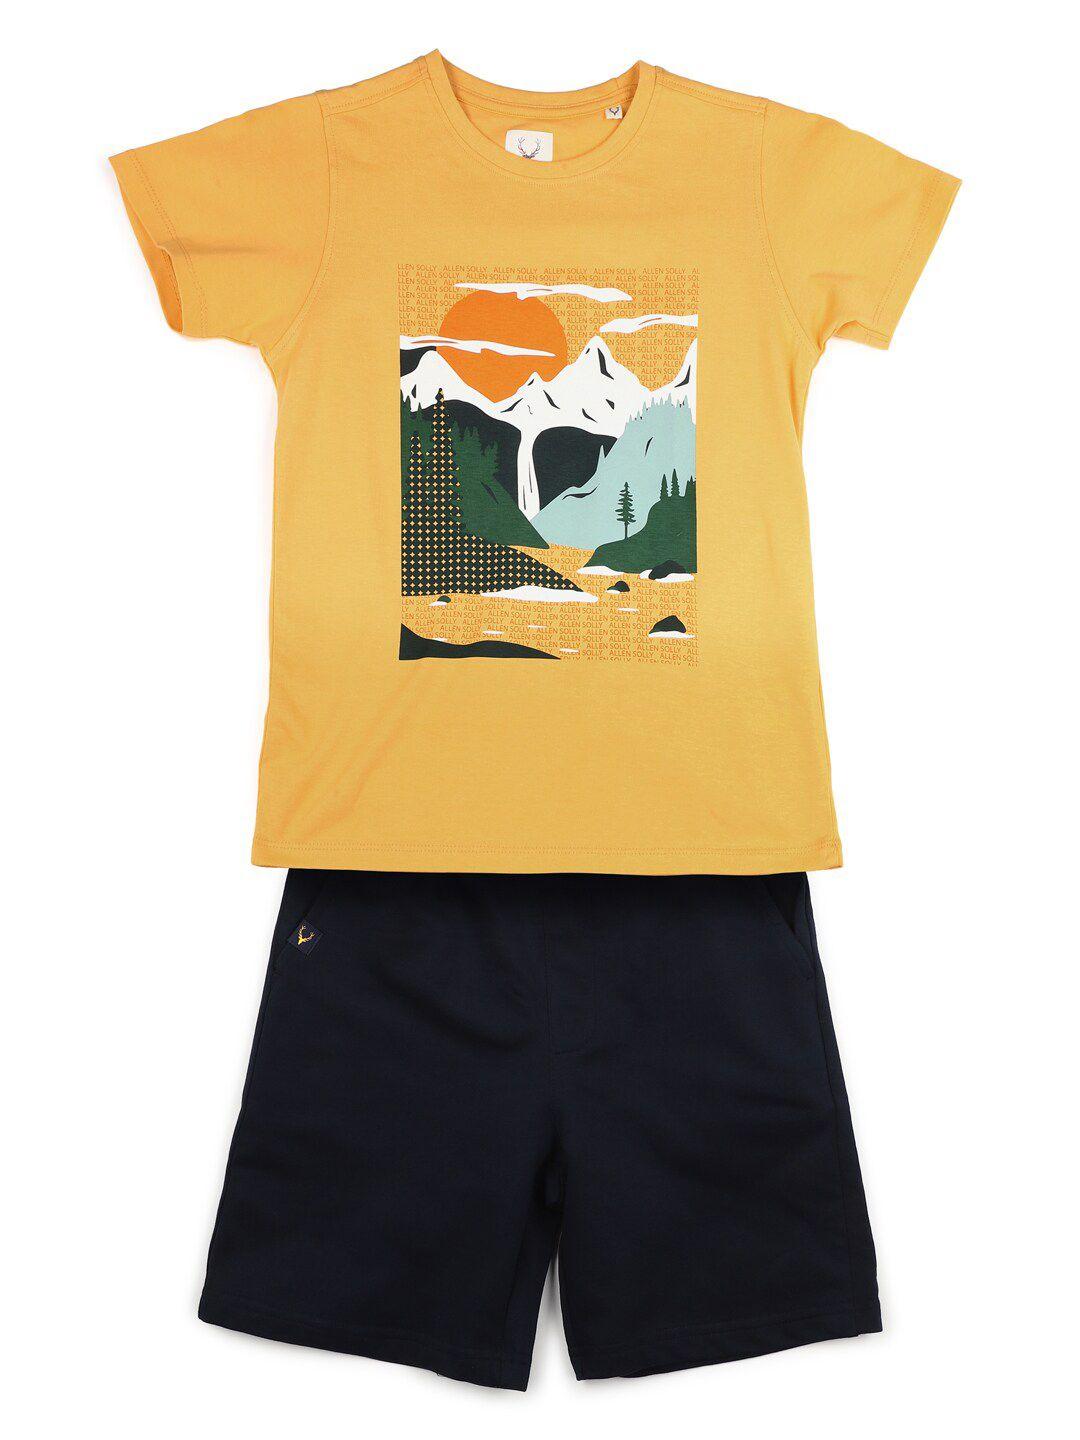 allen-solly-junior-boys-yellow-&-black-printed-cotton-t-shirt-with-shorts